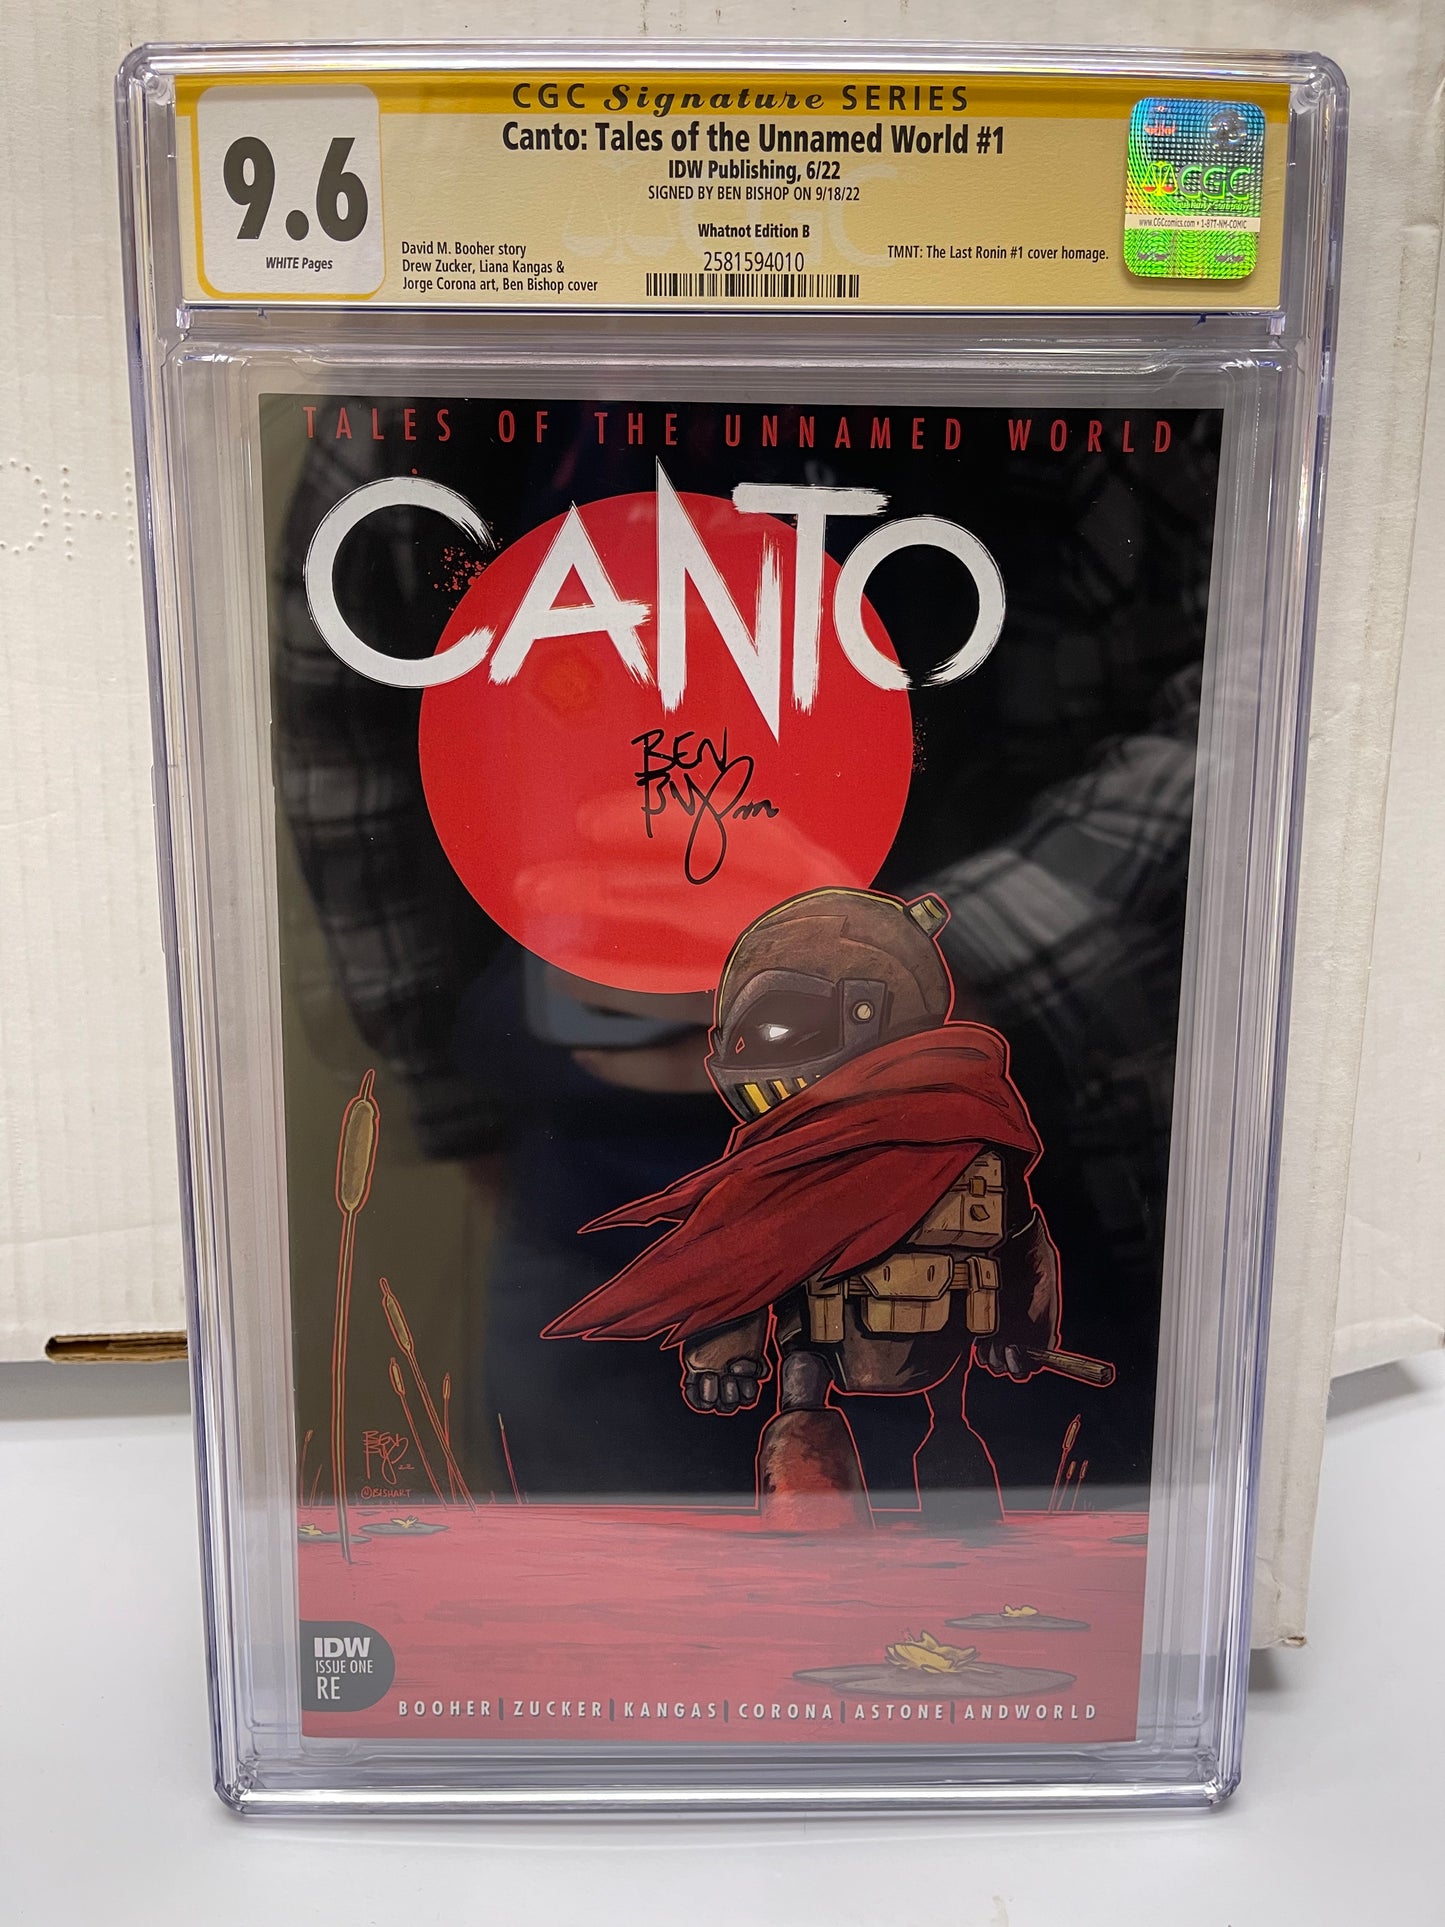 Canto Tales Of The Unnamed World #1 Ben Bishop WhatNot Last Ronin Homage CGC Signature Series - 9.6 (Signed by Ben Bishop) #2